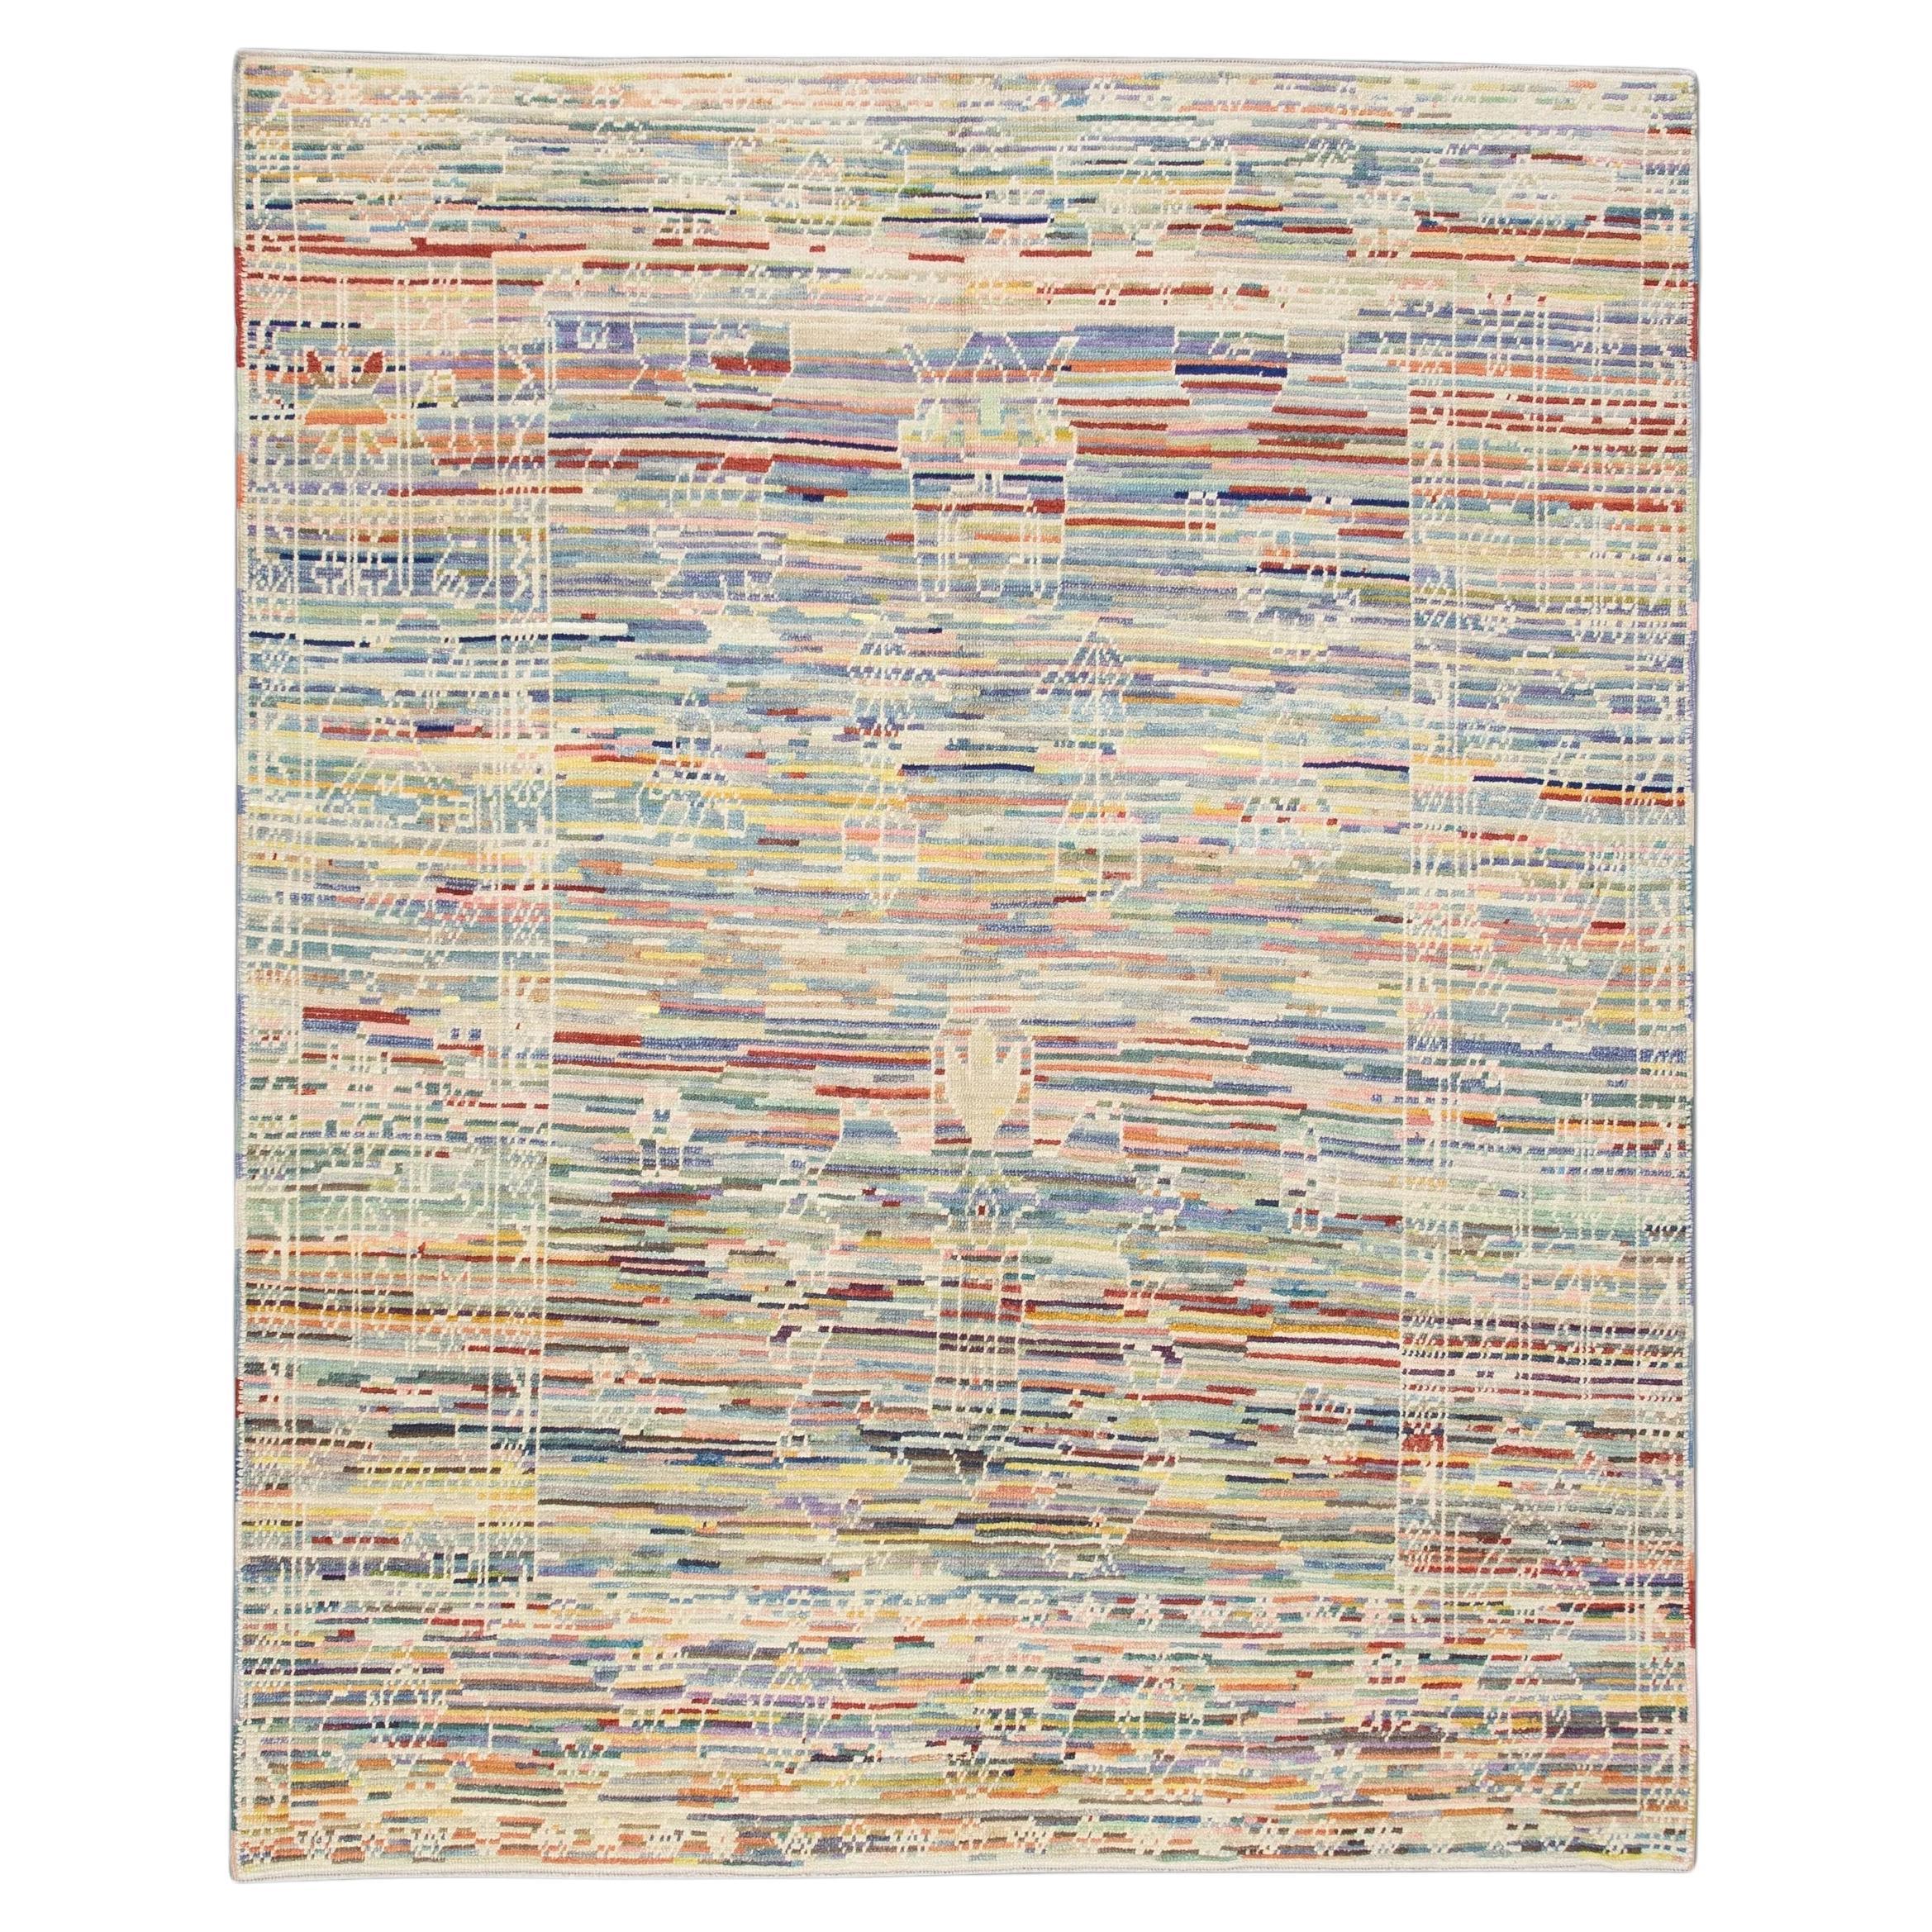 Handwoven Wool Turkish Oushak Rug in Multicolor Striped Pattern 8'4" x 10'4" For Sale